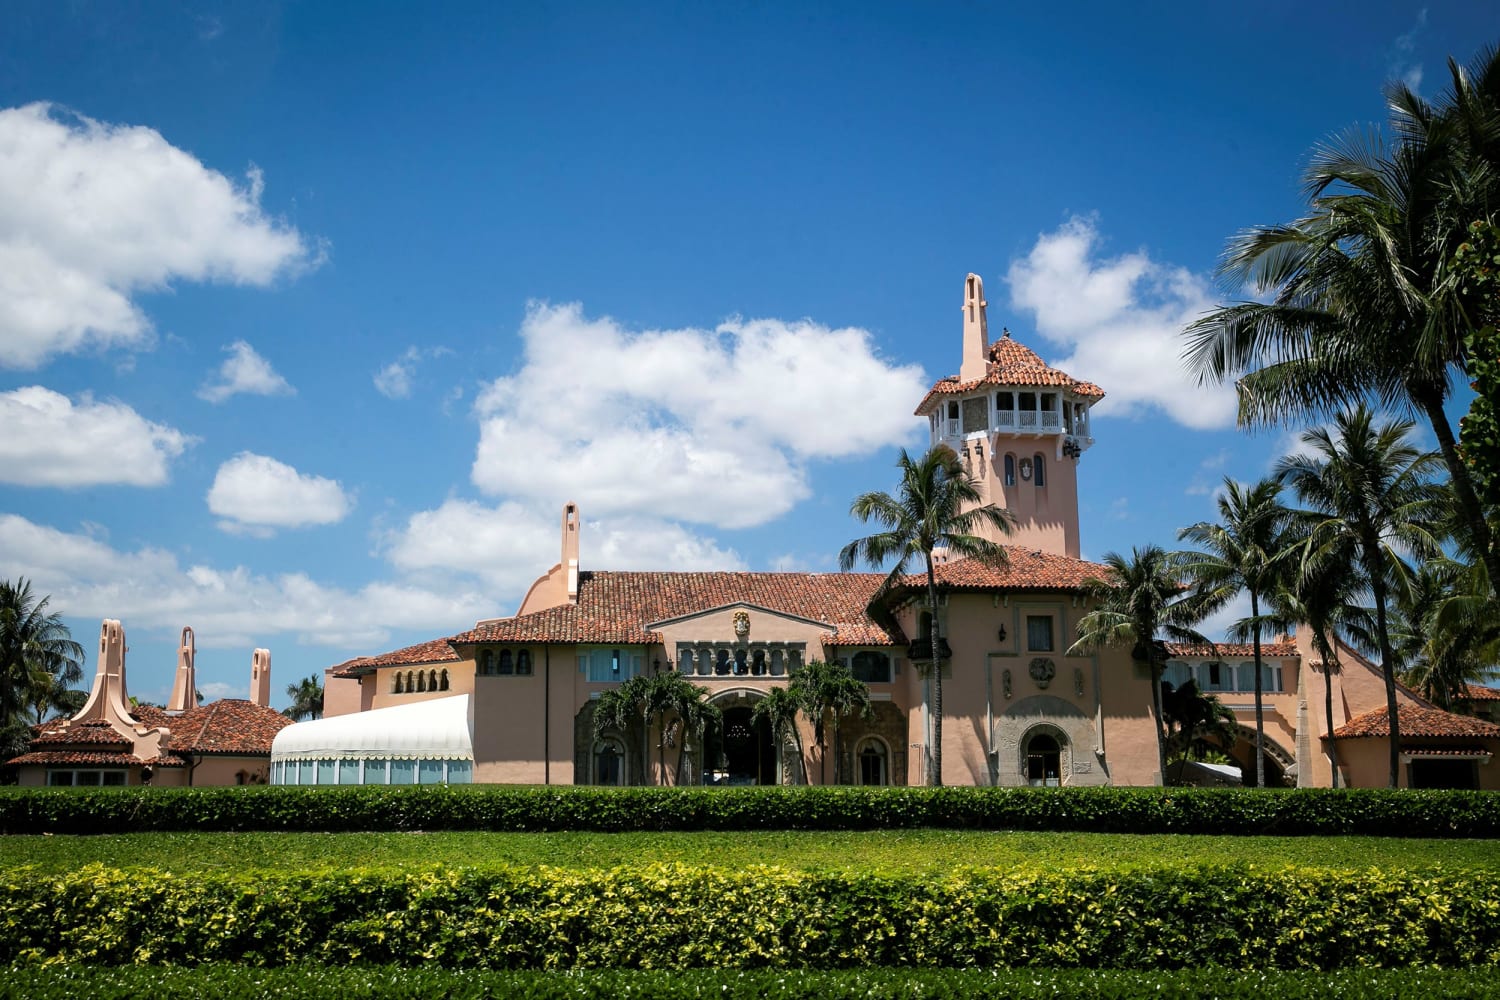 Trump's Mar-a-Lago club to partially reopen — but members must bring own  towels